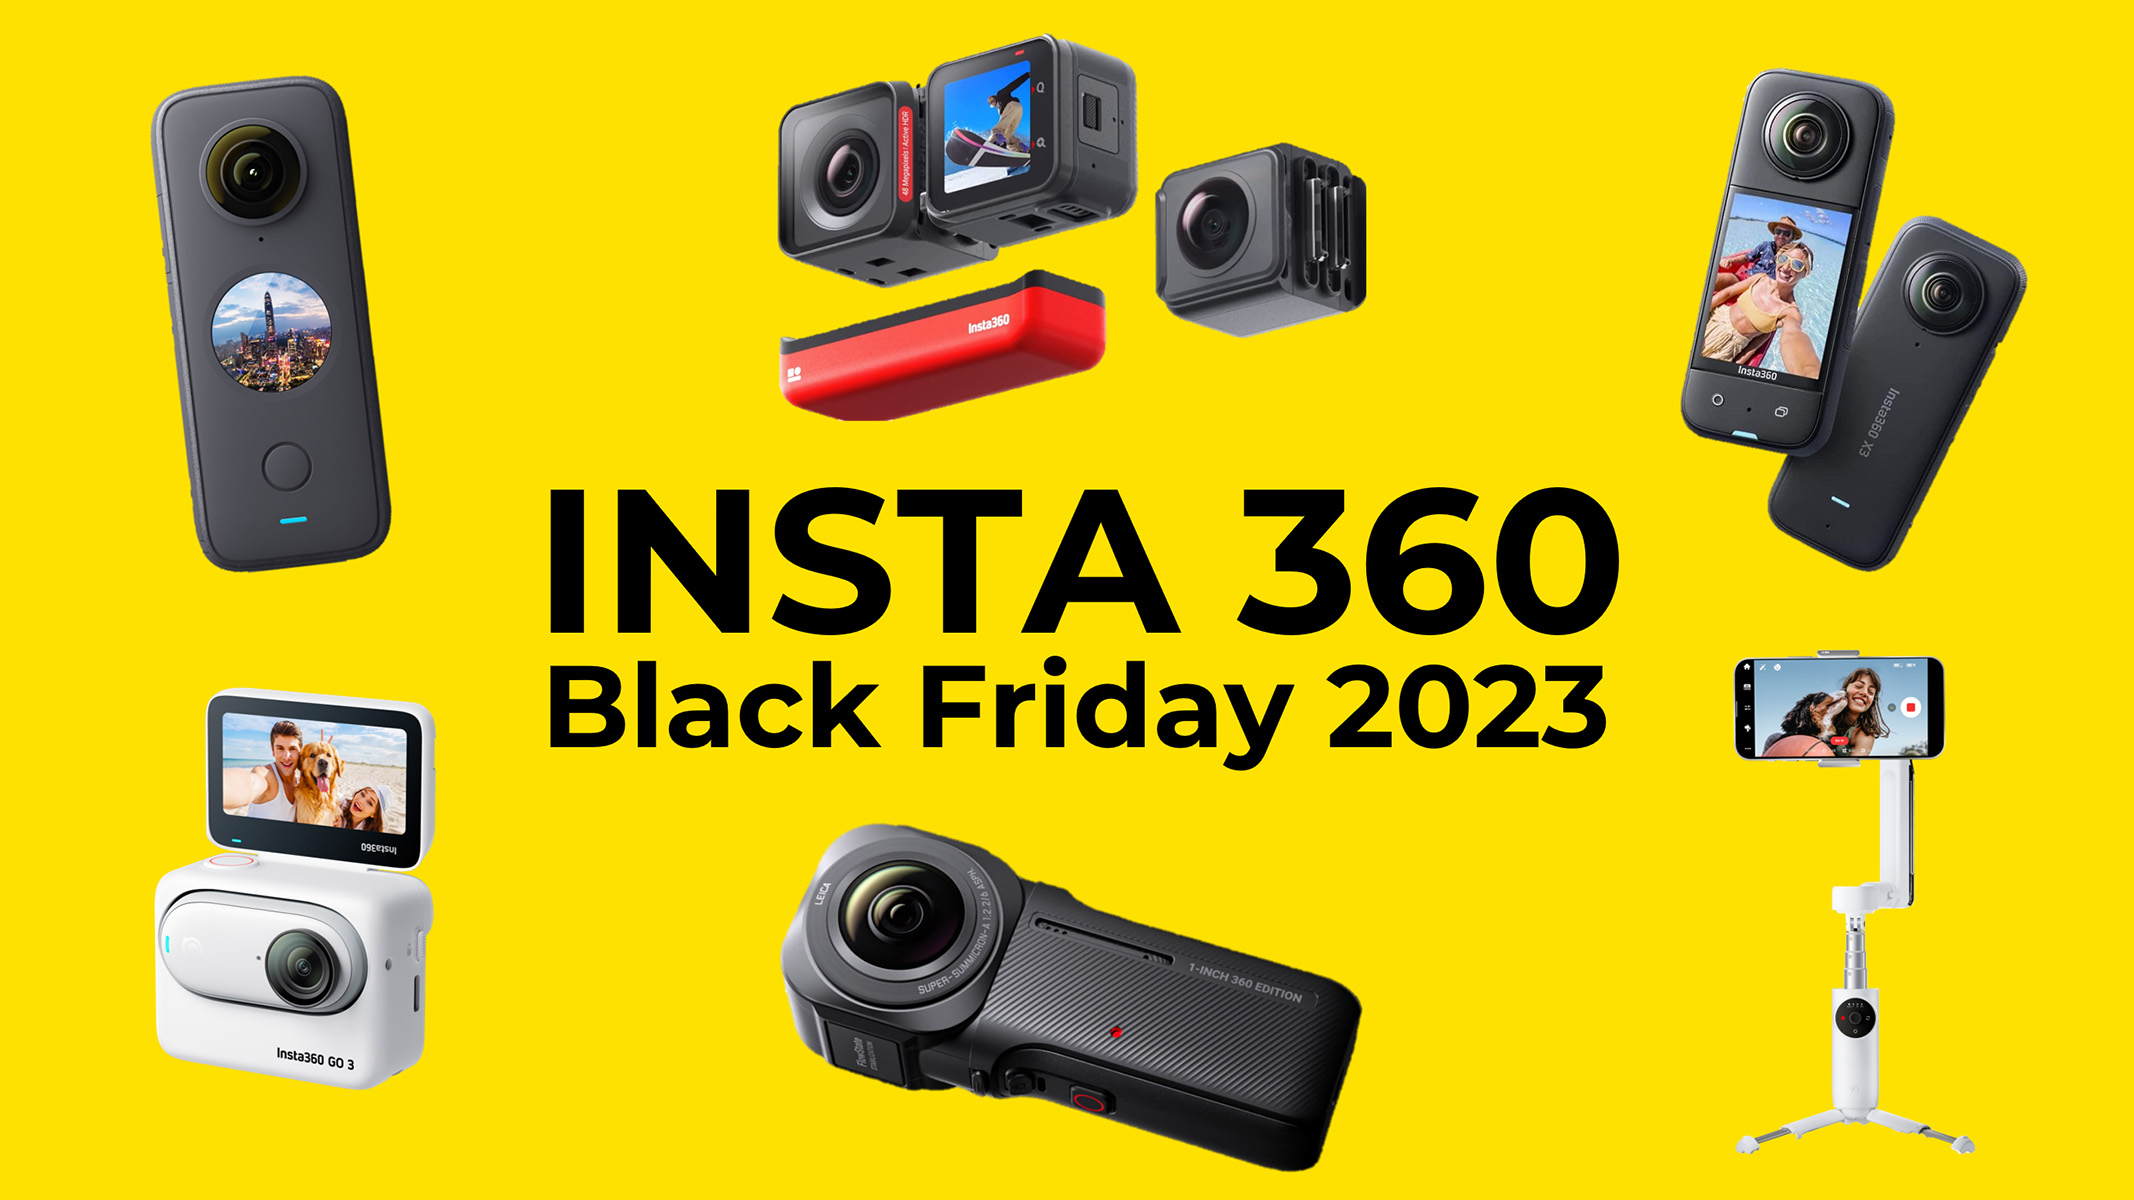 Insta360 2-in-1 Invisible Selfie Stick + Built-in Tripod ONE X3, ONE X2,  ONE X, ONE RS/R, GO 2, etc